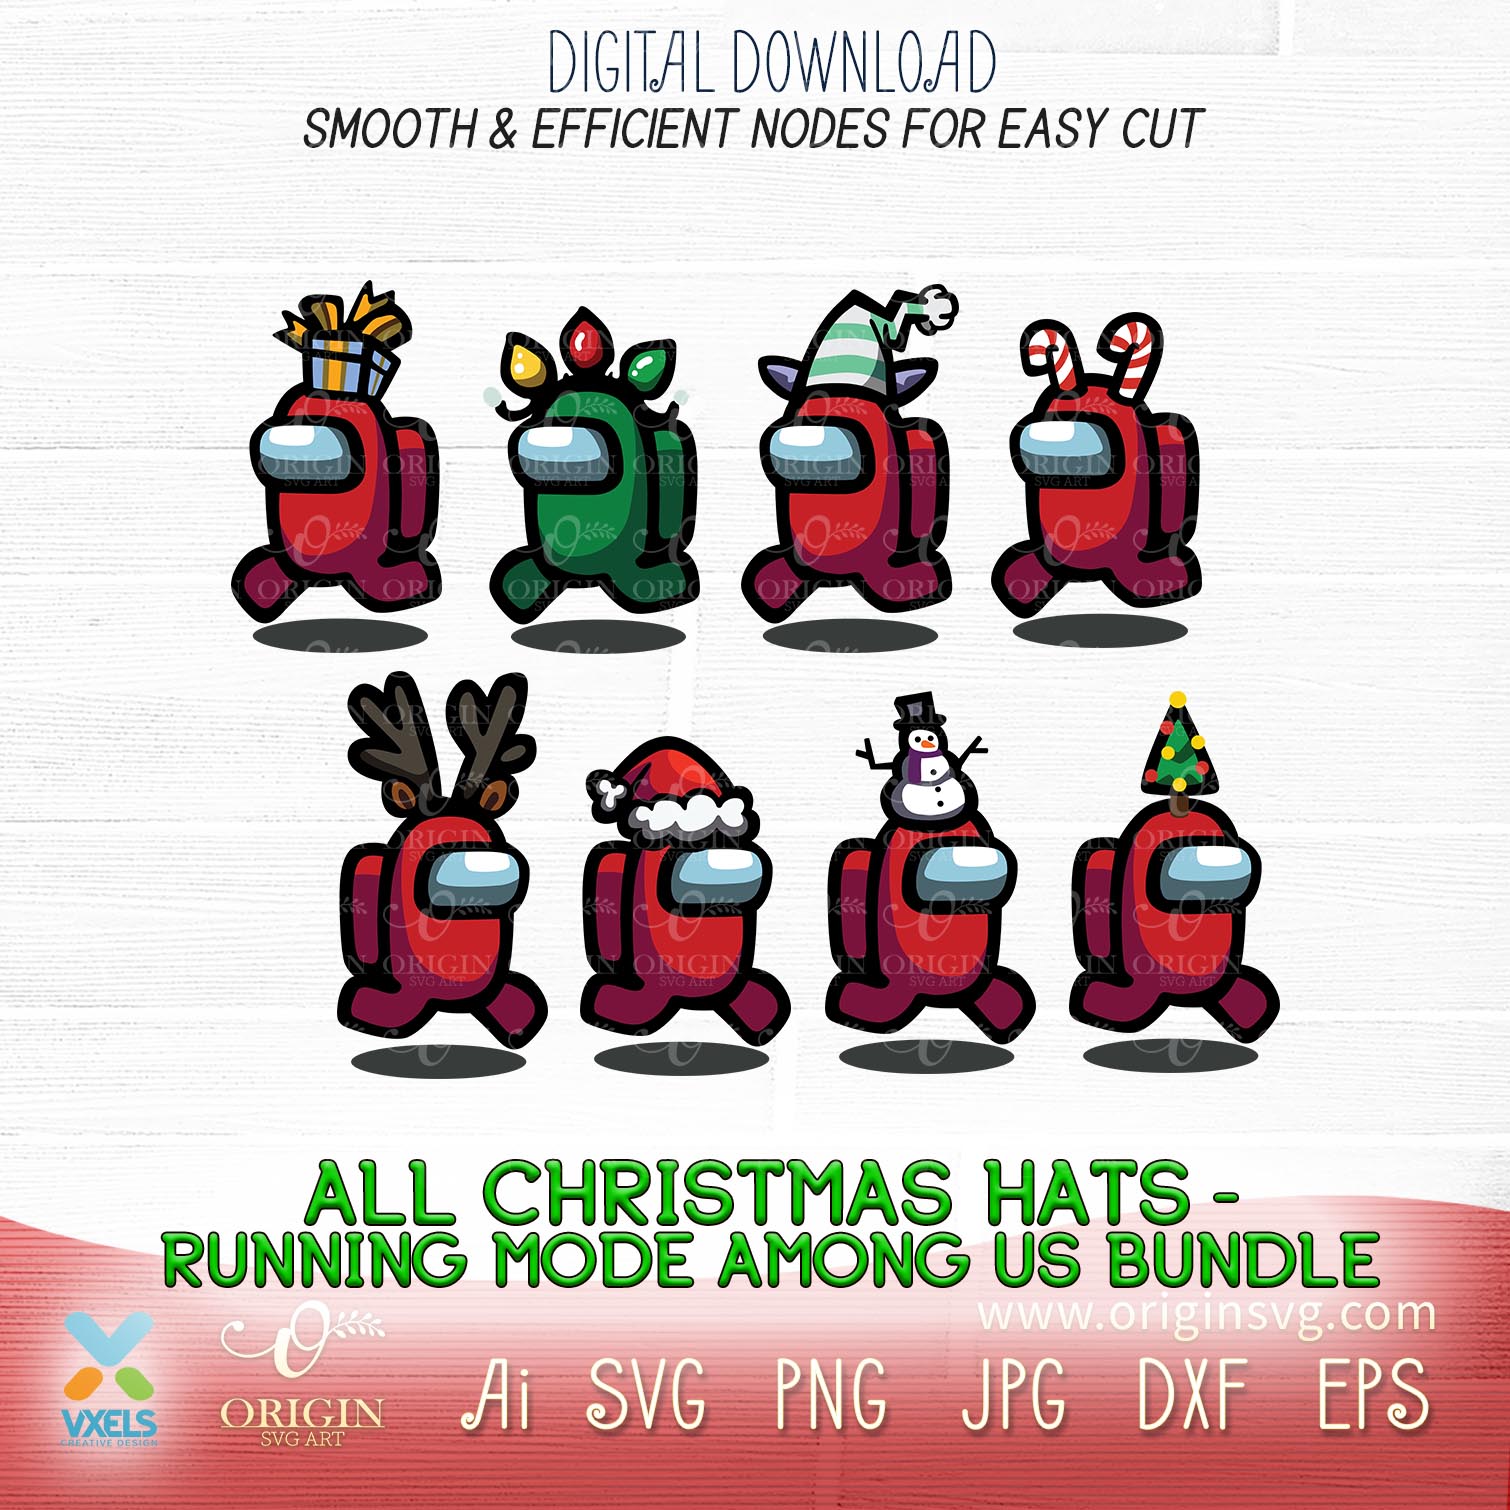 All Christmas Among Us With Hats Character Colors Running Version Svg